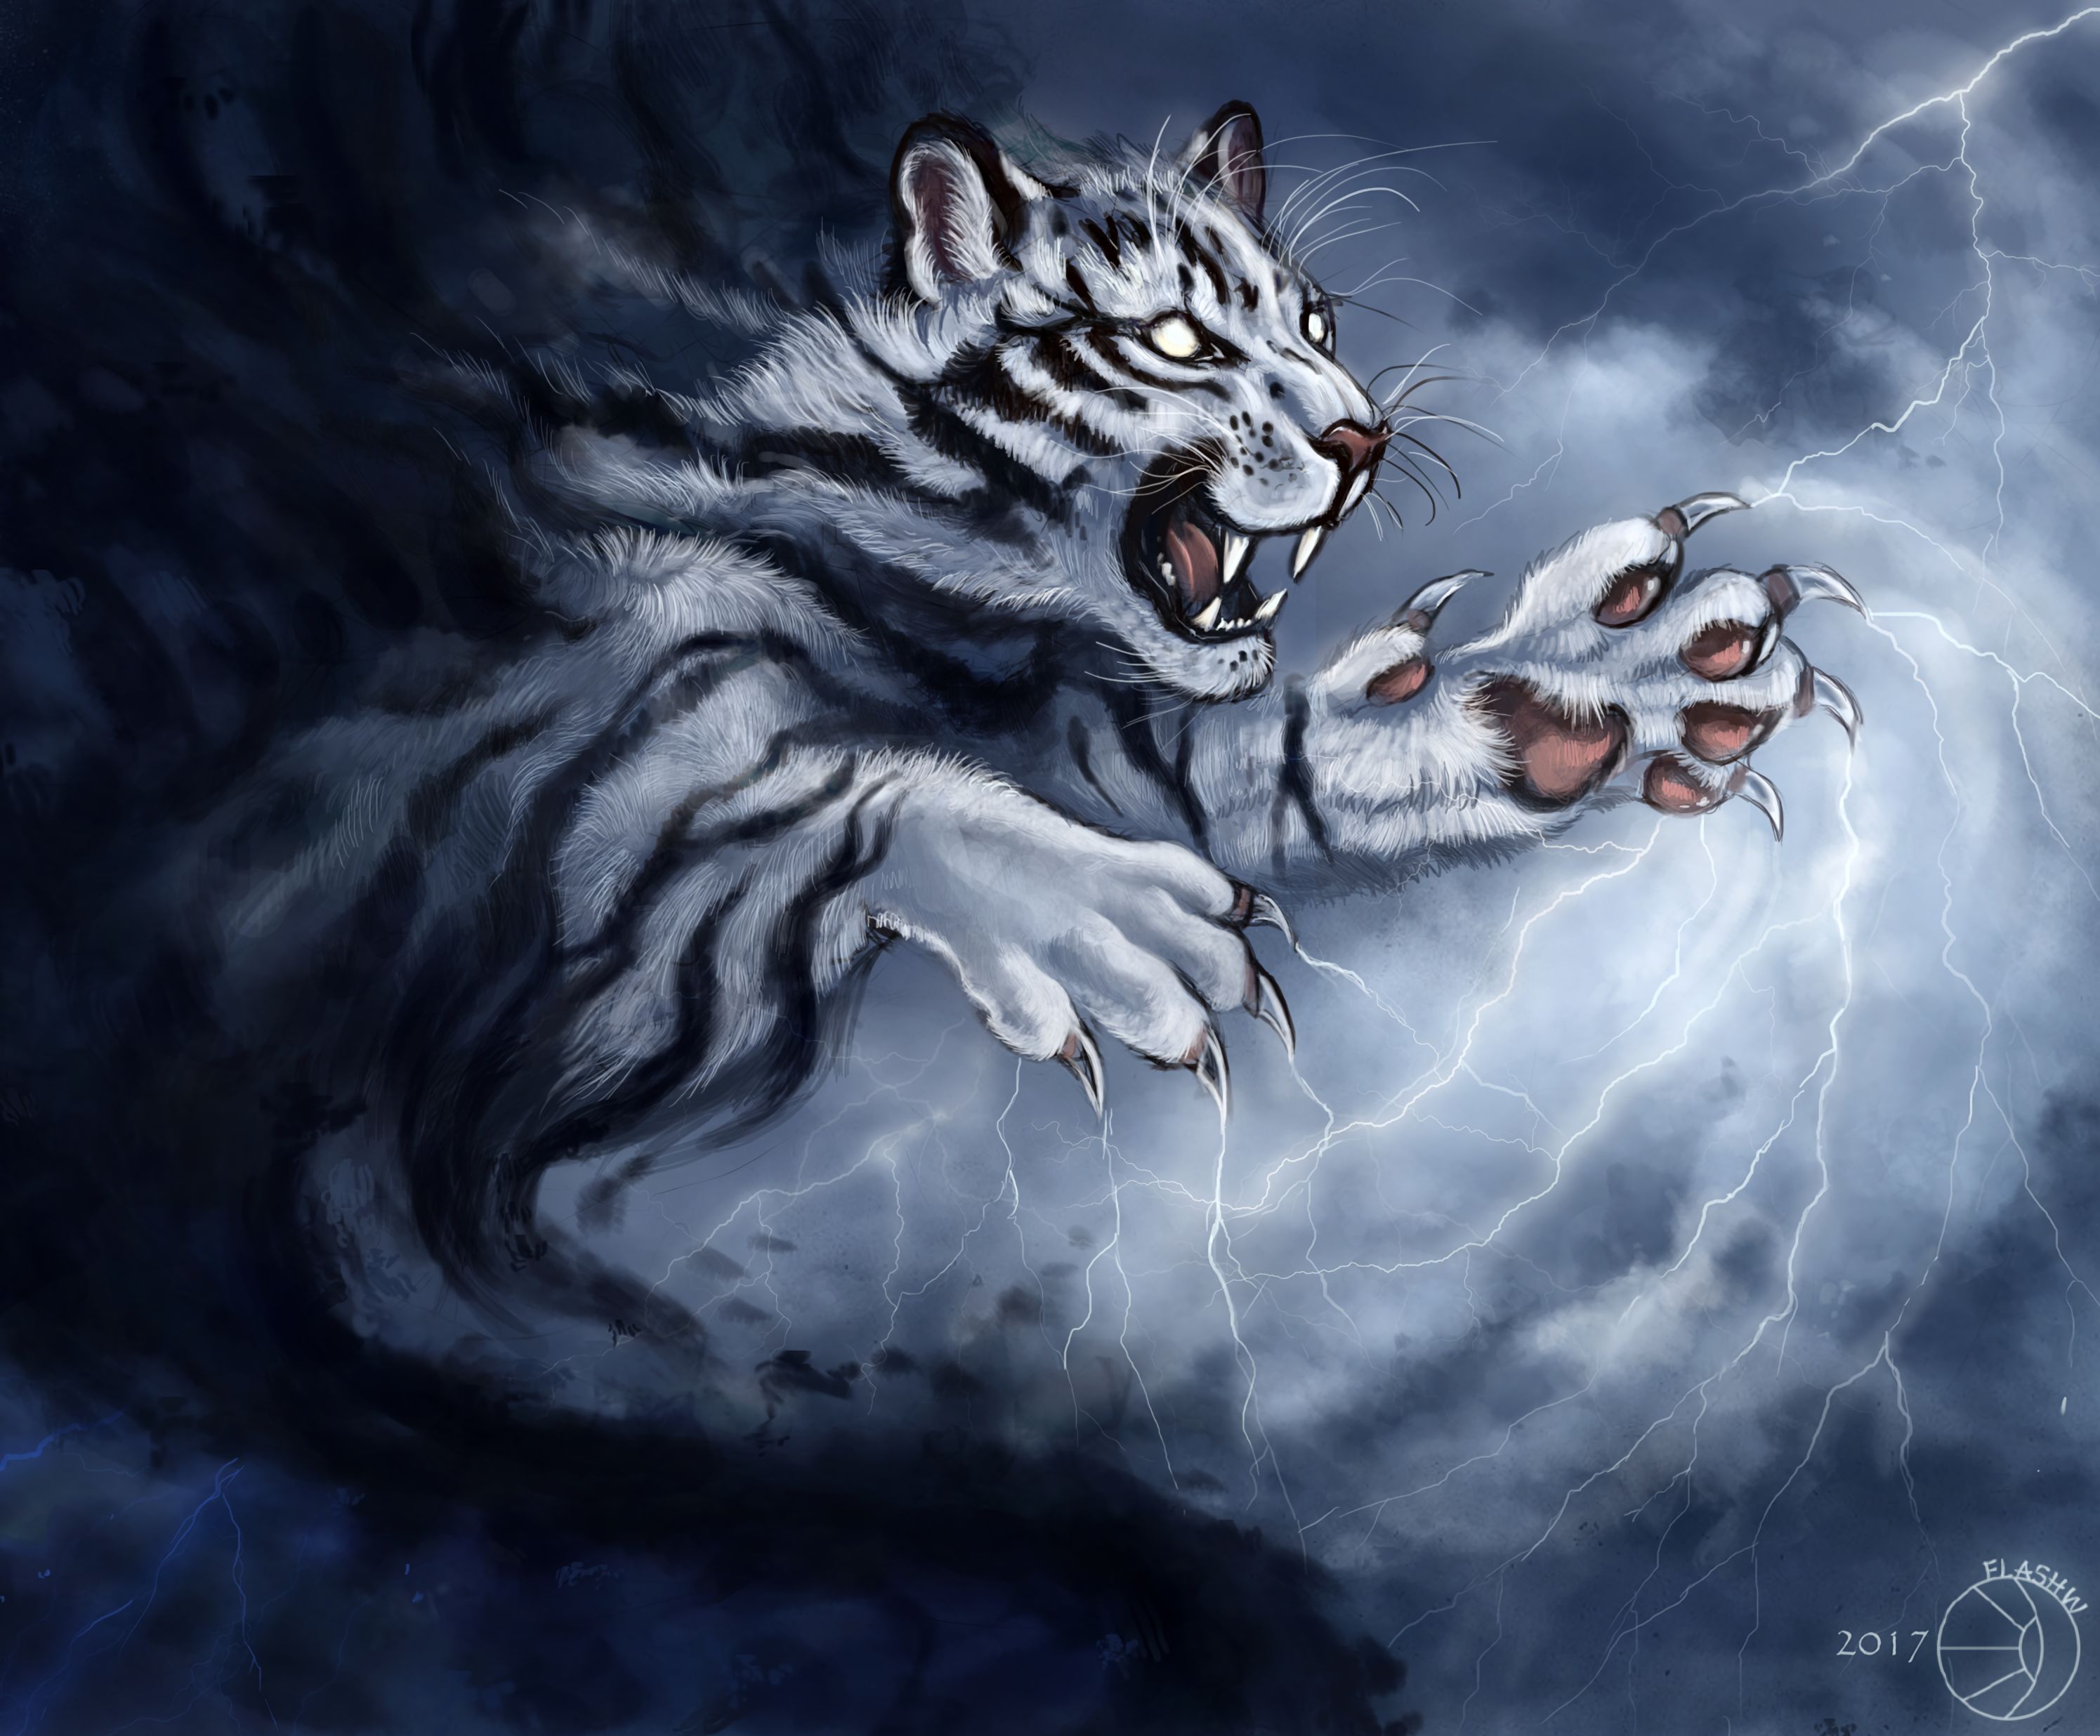 76598 download wallpaper tiger, art, grin, predator, claws screensavers and pictures for free